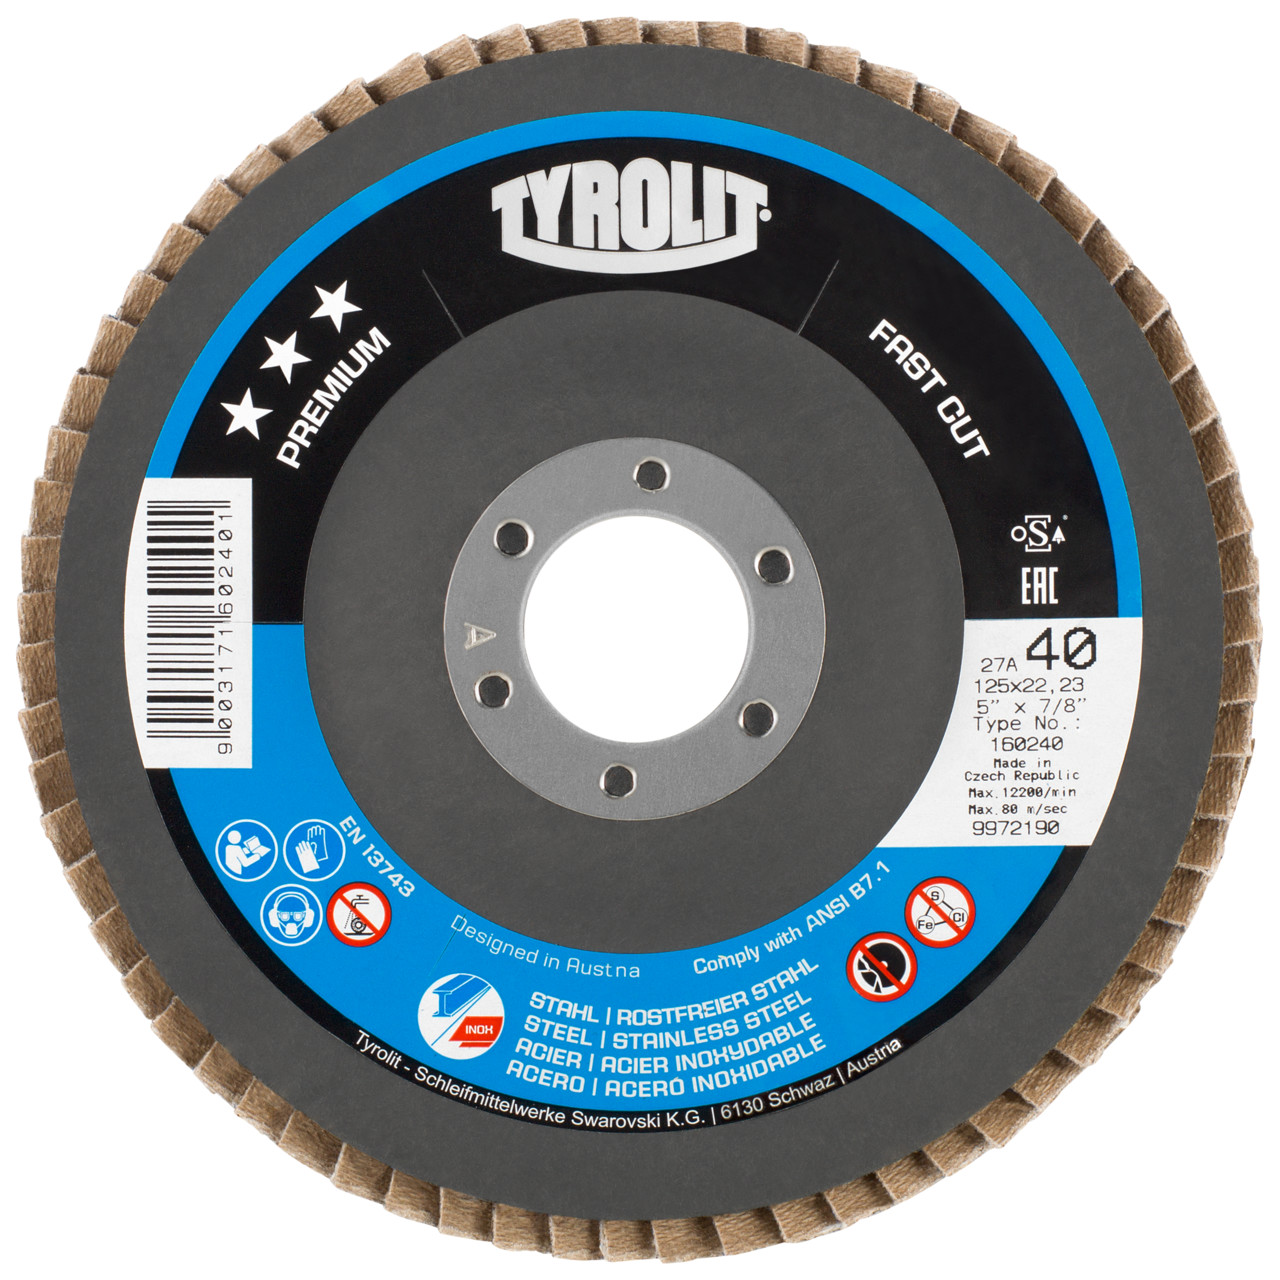 Tyrolit Serrated lock washer DxH 178x22.2 FASTCUT for steel &amp; stainless steel, P60, shape: 27A - cranked version (glass fibre carrier body version), Art. 160246